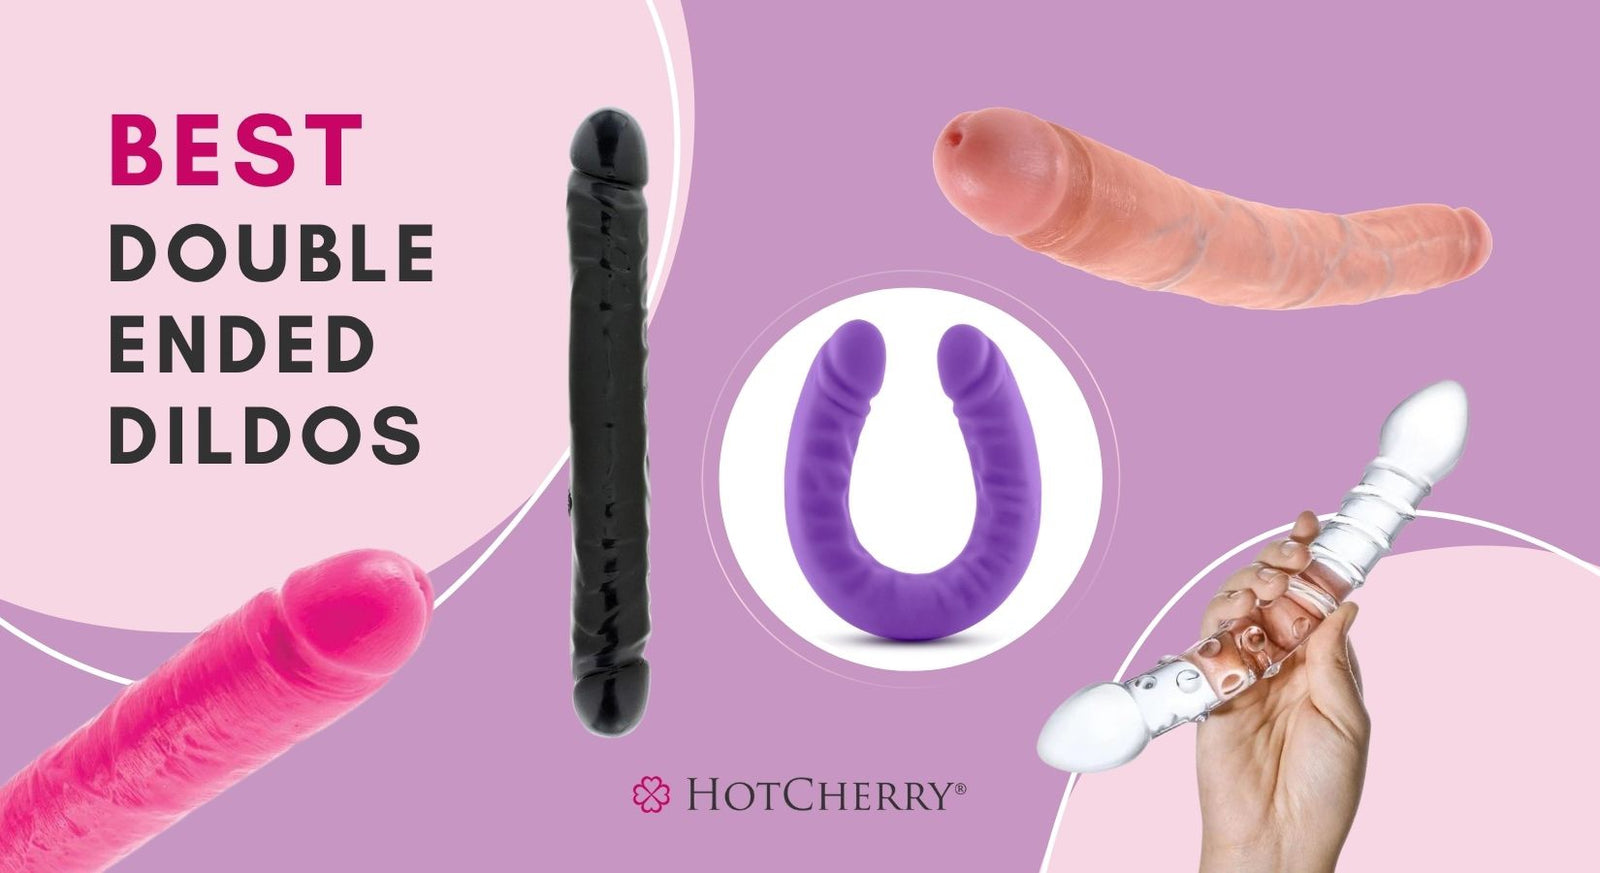 10 Best Double Ended Dildos for Couples